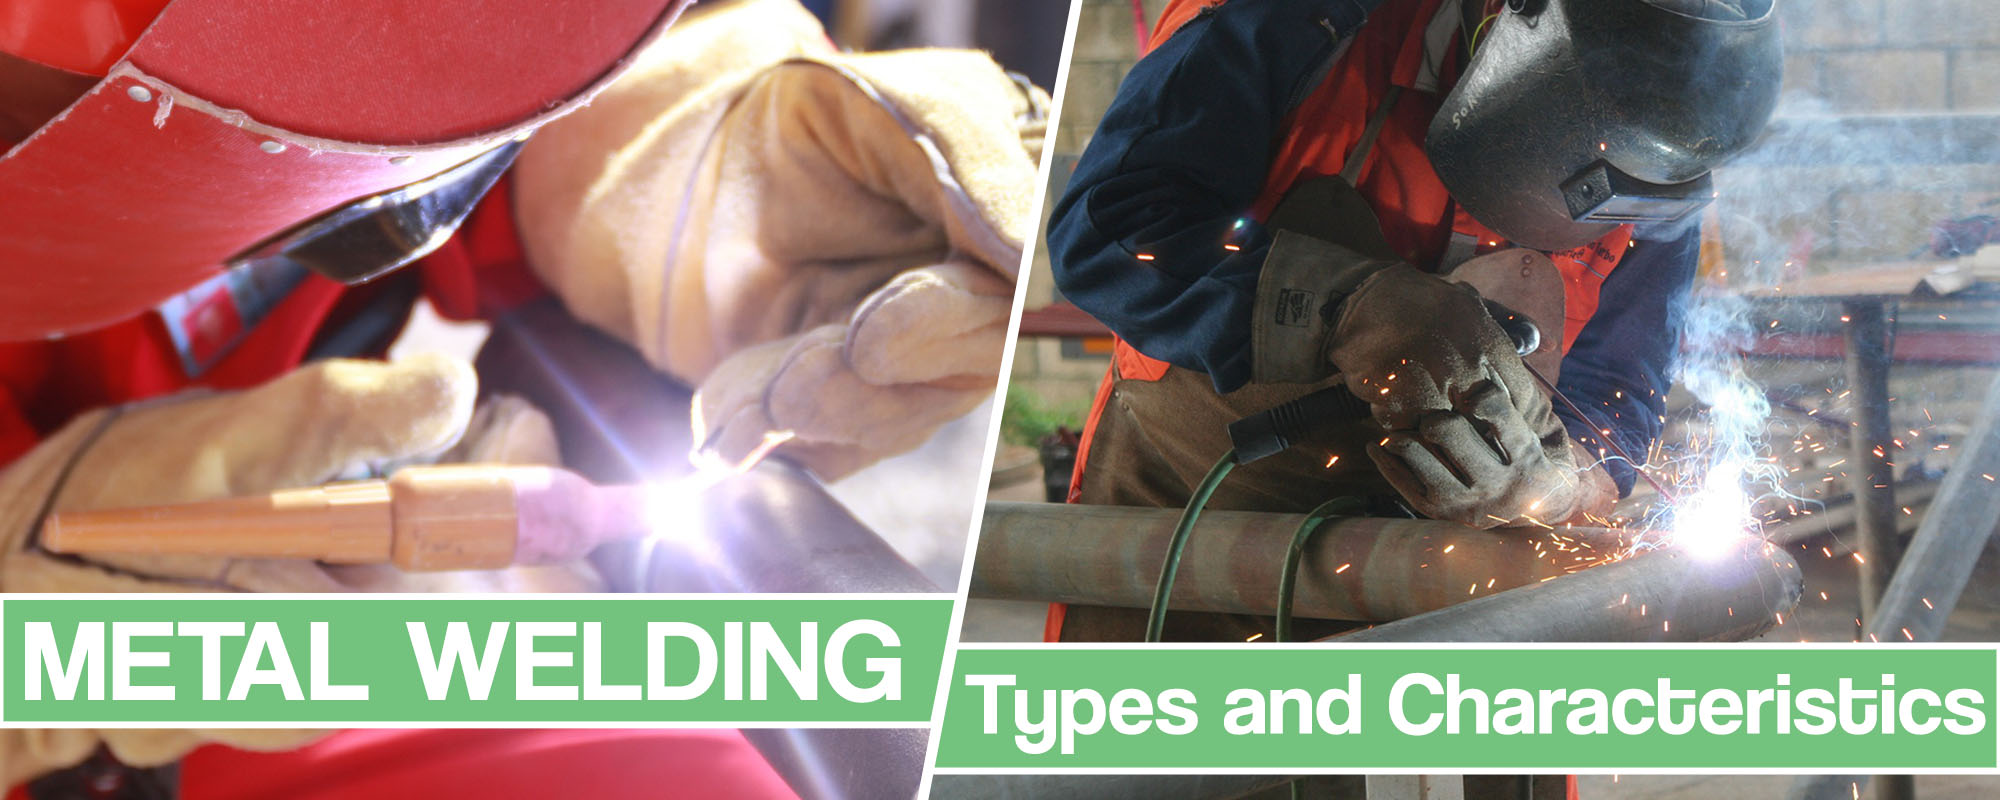 Metal Welding Alloys – How To Weld Metal Together And What Metals Can And Cannot Be Welded